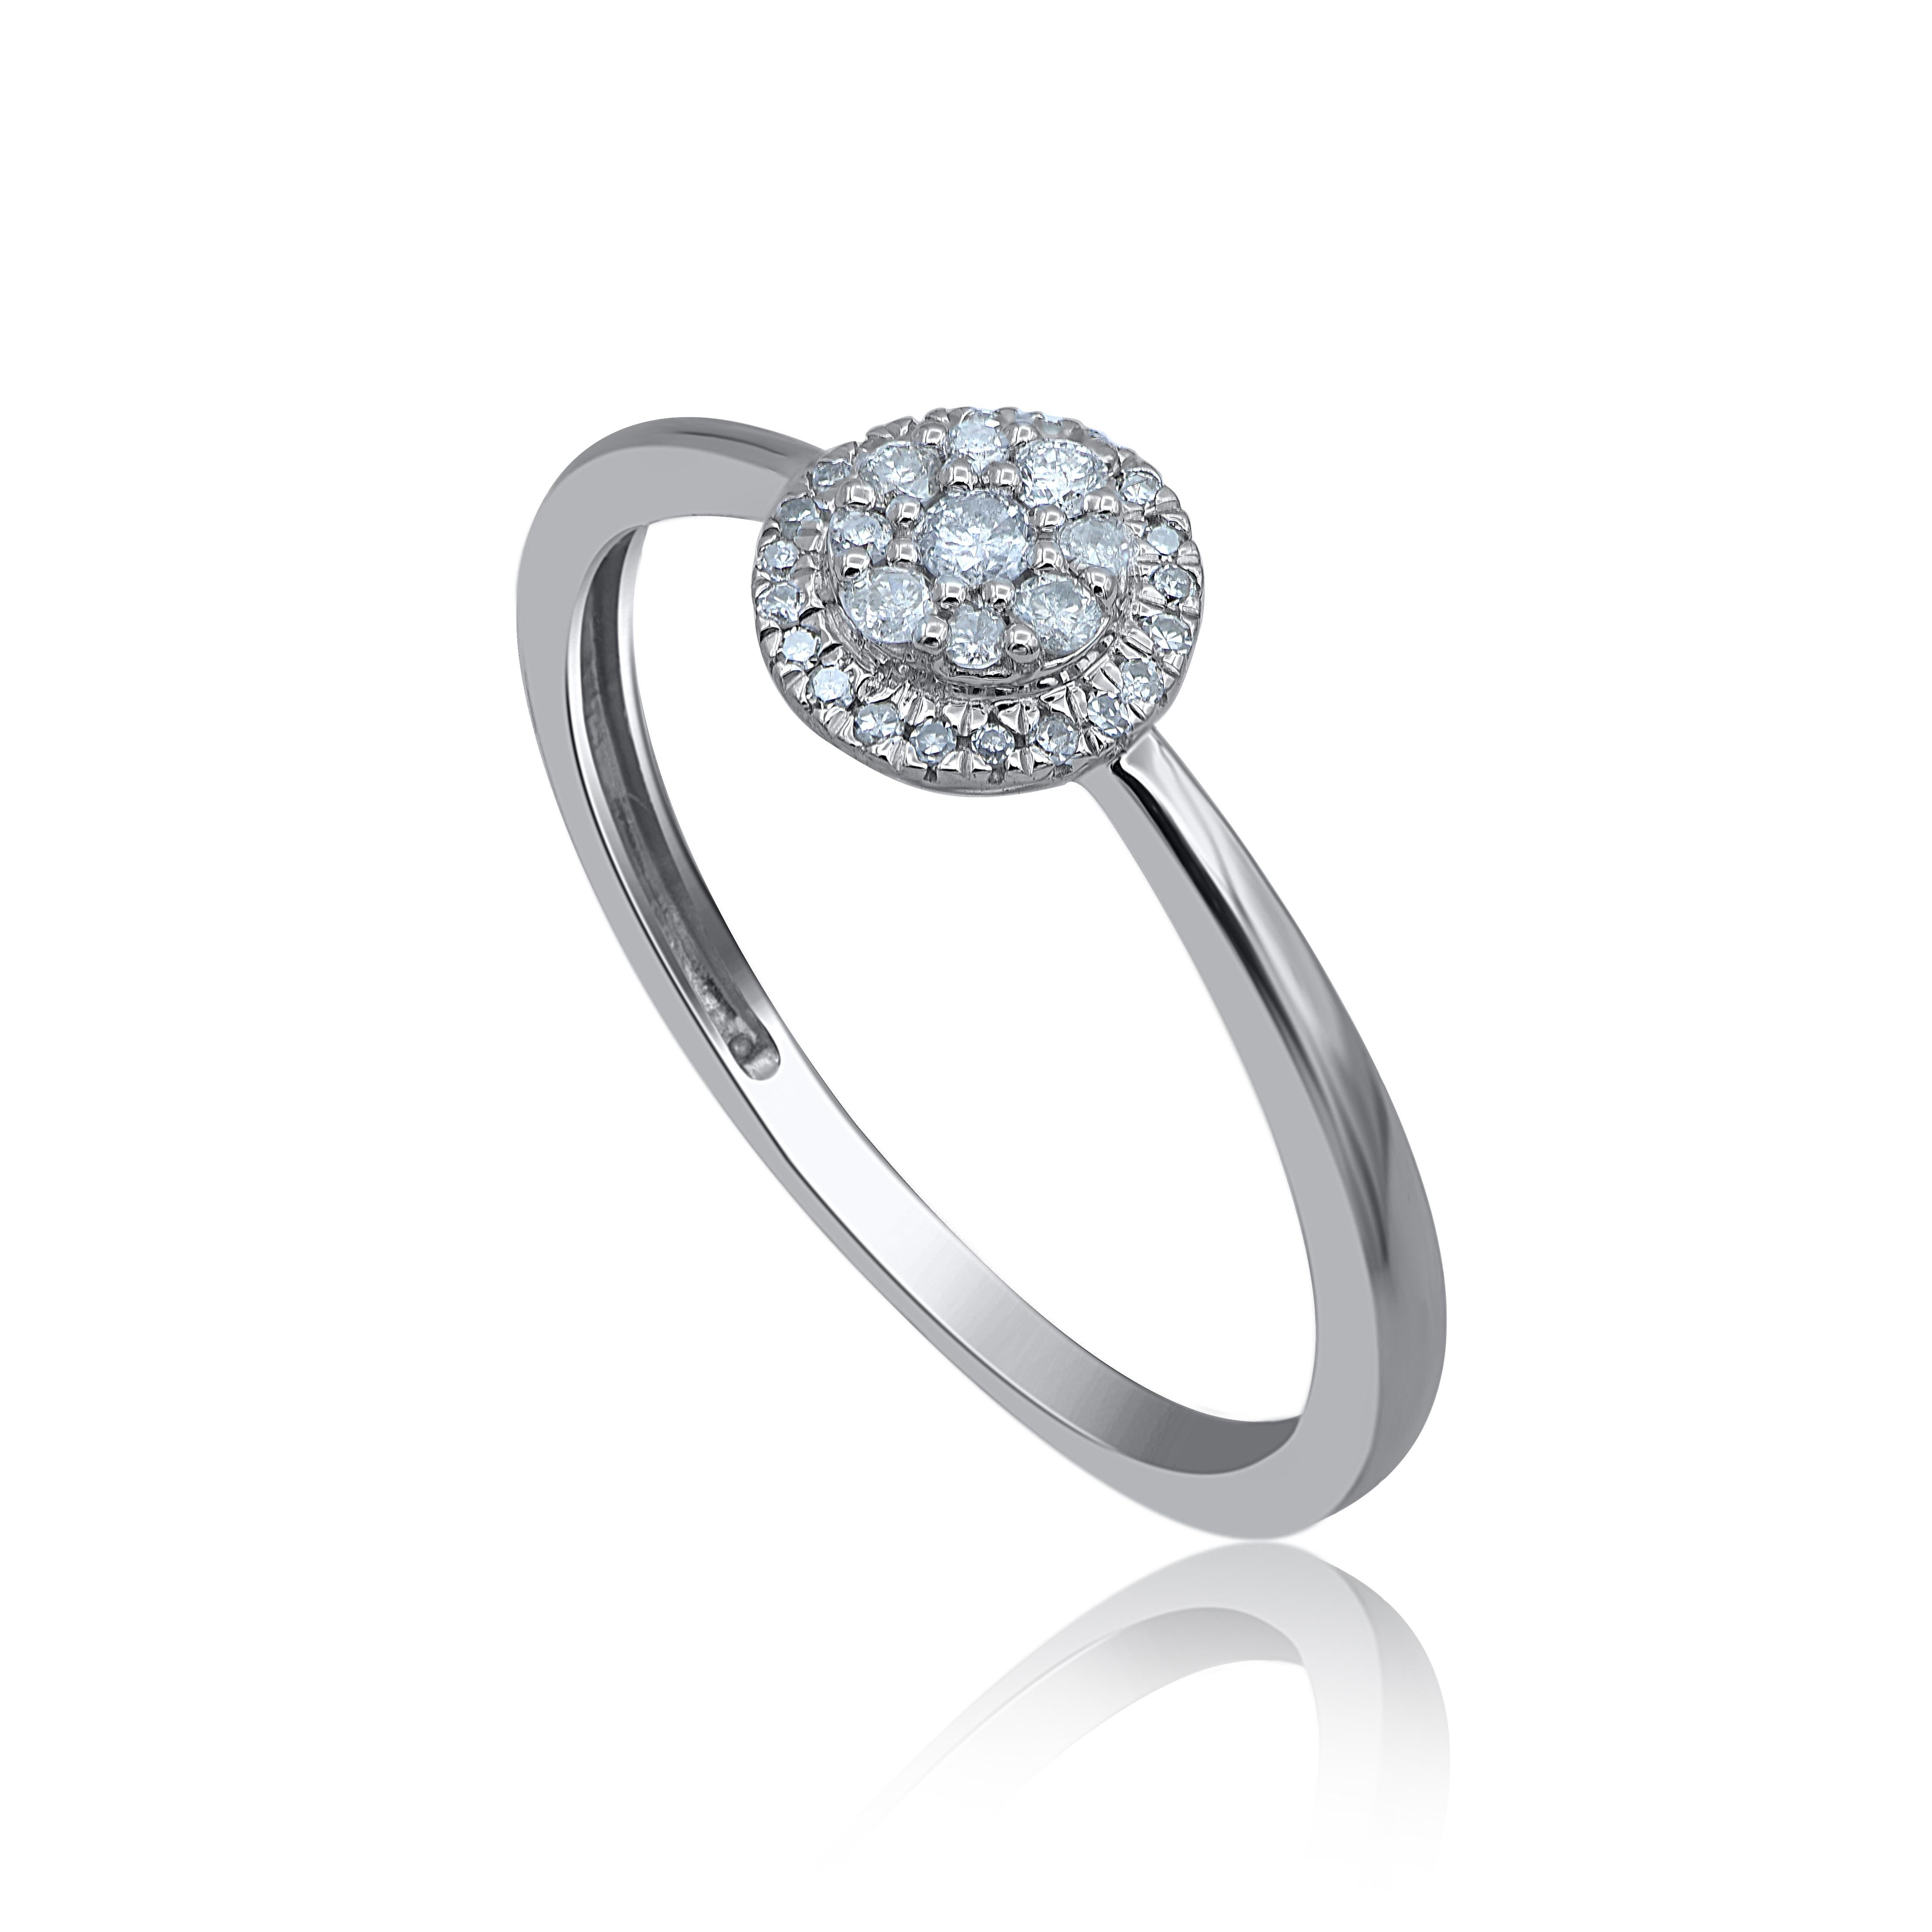 Add a touch of elegance with this diamond engagement ring. This ring is beautifully crafted in 14 karat white gold and set with 30 single cut and brilliant cut diamonds in prong setting. The total weight of diamonds is 0.12 carat, H-I Color and I2